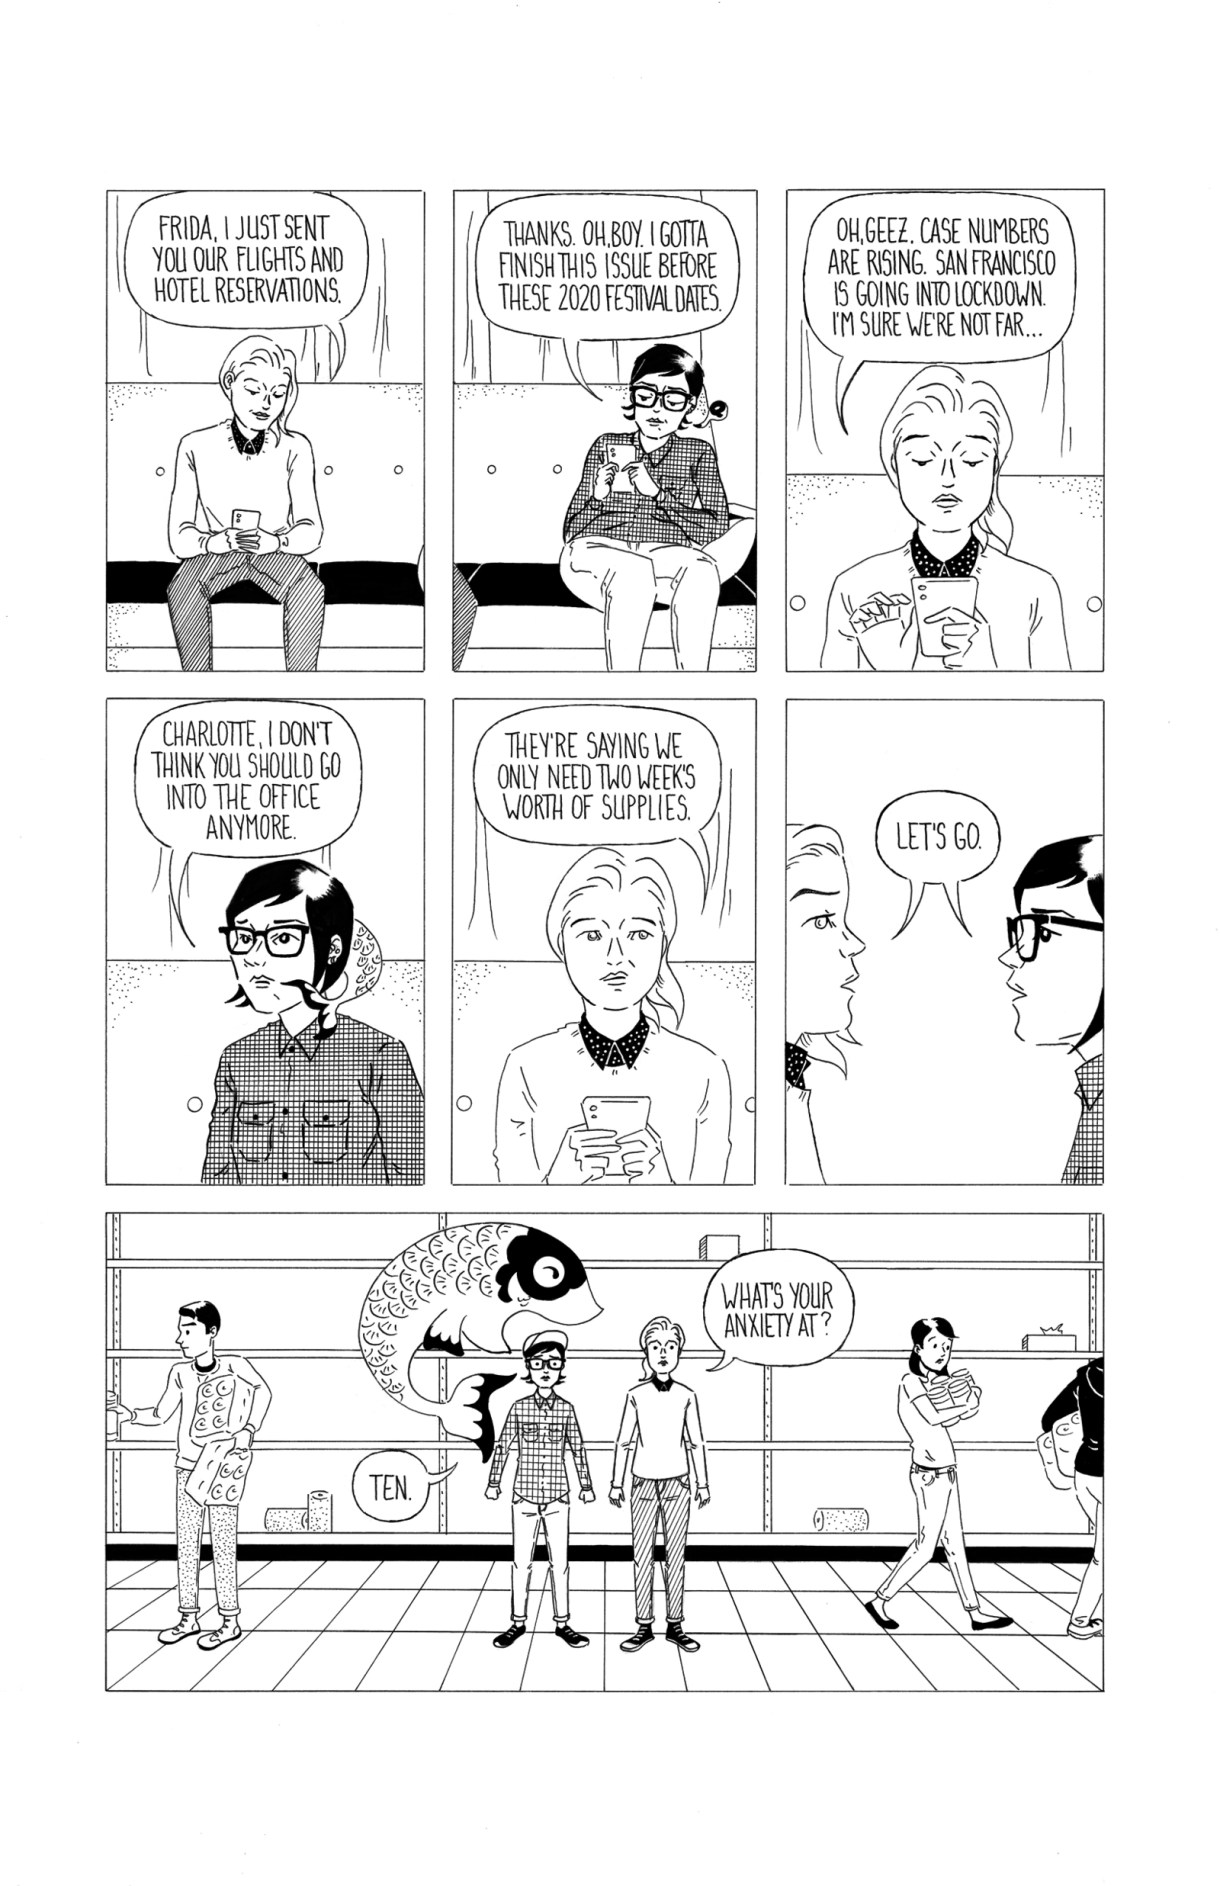 In seven-panel black and white line drawn comic, Charlotte and Frida return home from Japan. However with Covid numbers rising, they are worried about what's coming next. Frida encourages Charolette to begin working from home. Charolette reads on her phone that they need two weeks worth of groceries, but by the time they get to the store everything is empty. Charlotte asks Frida what her anxiety level is at, and Frida responds "A Ten."